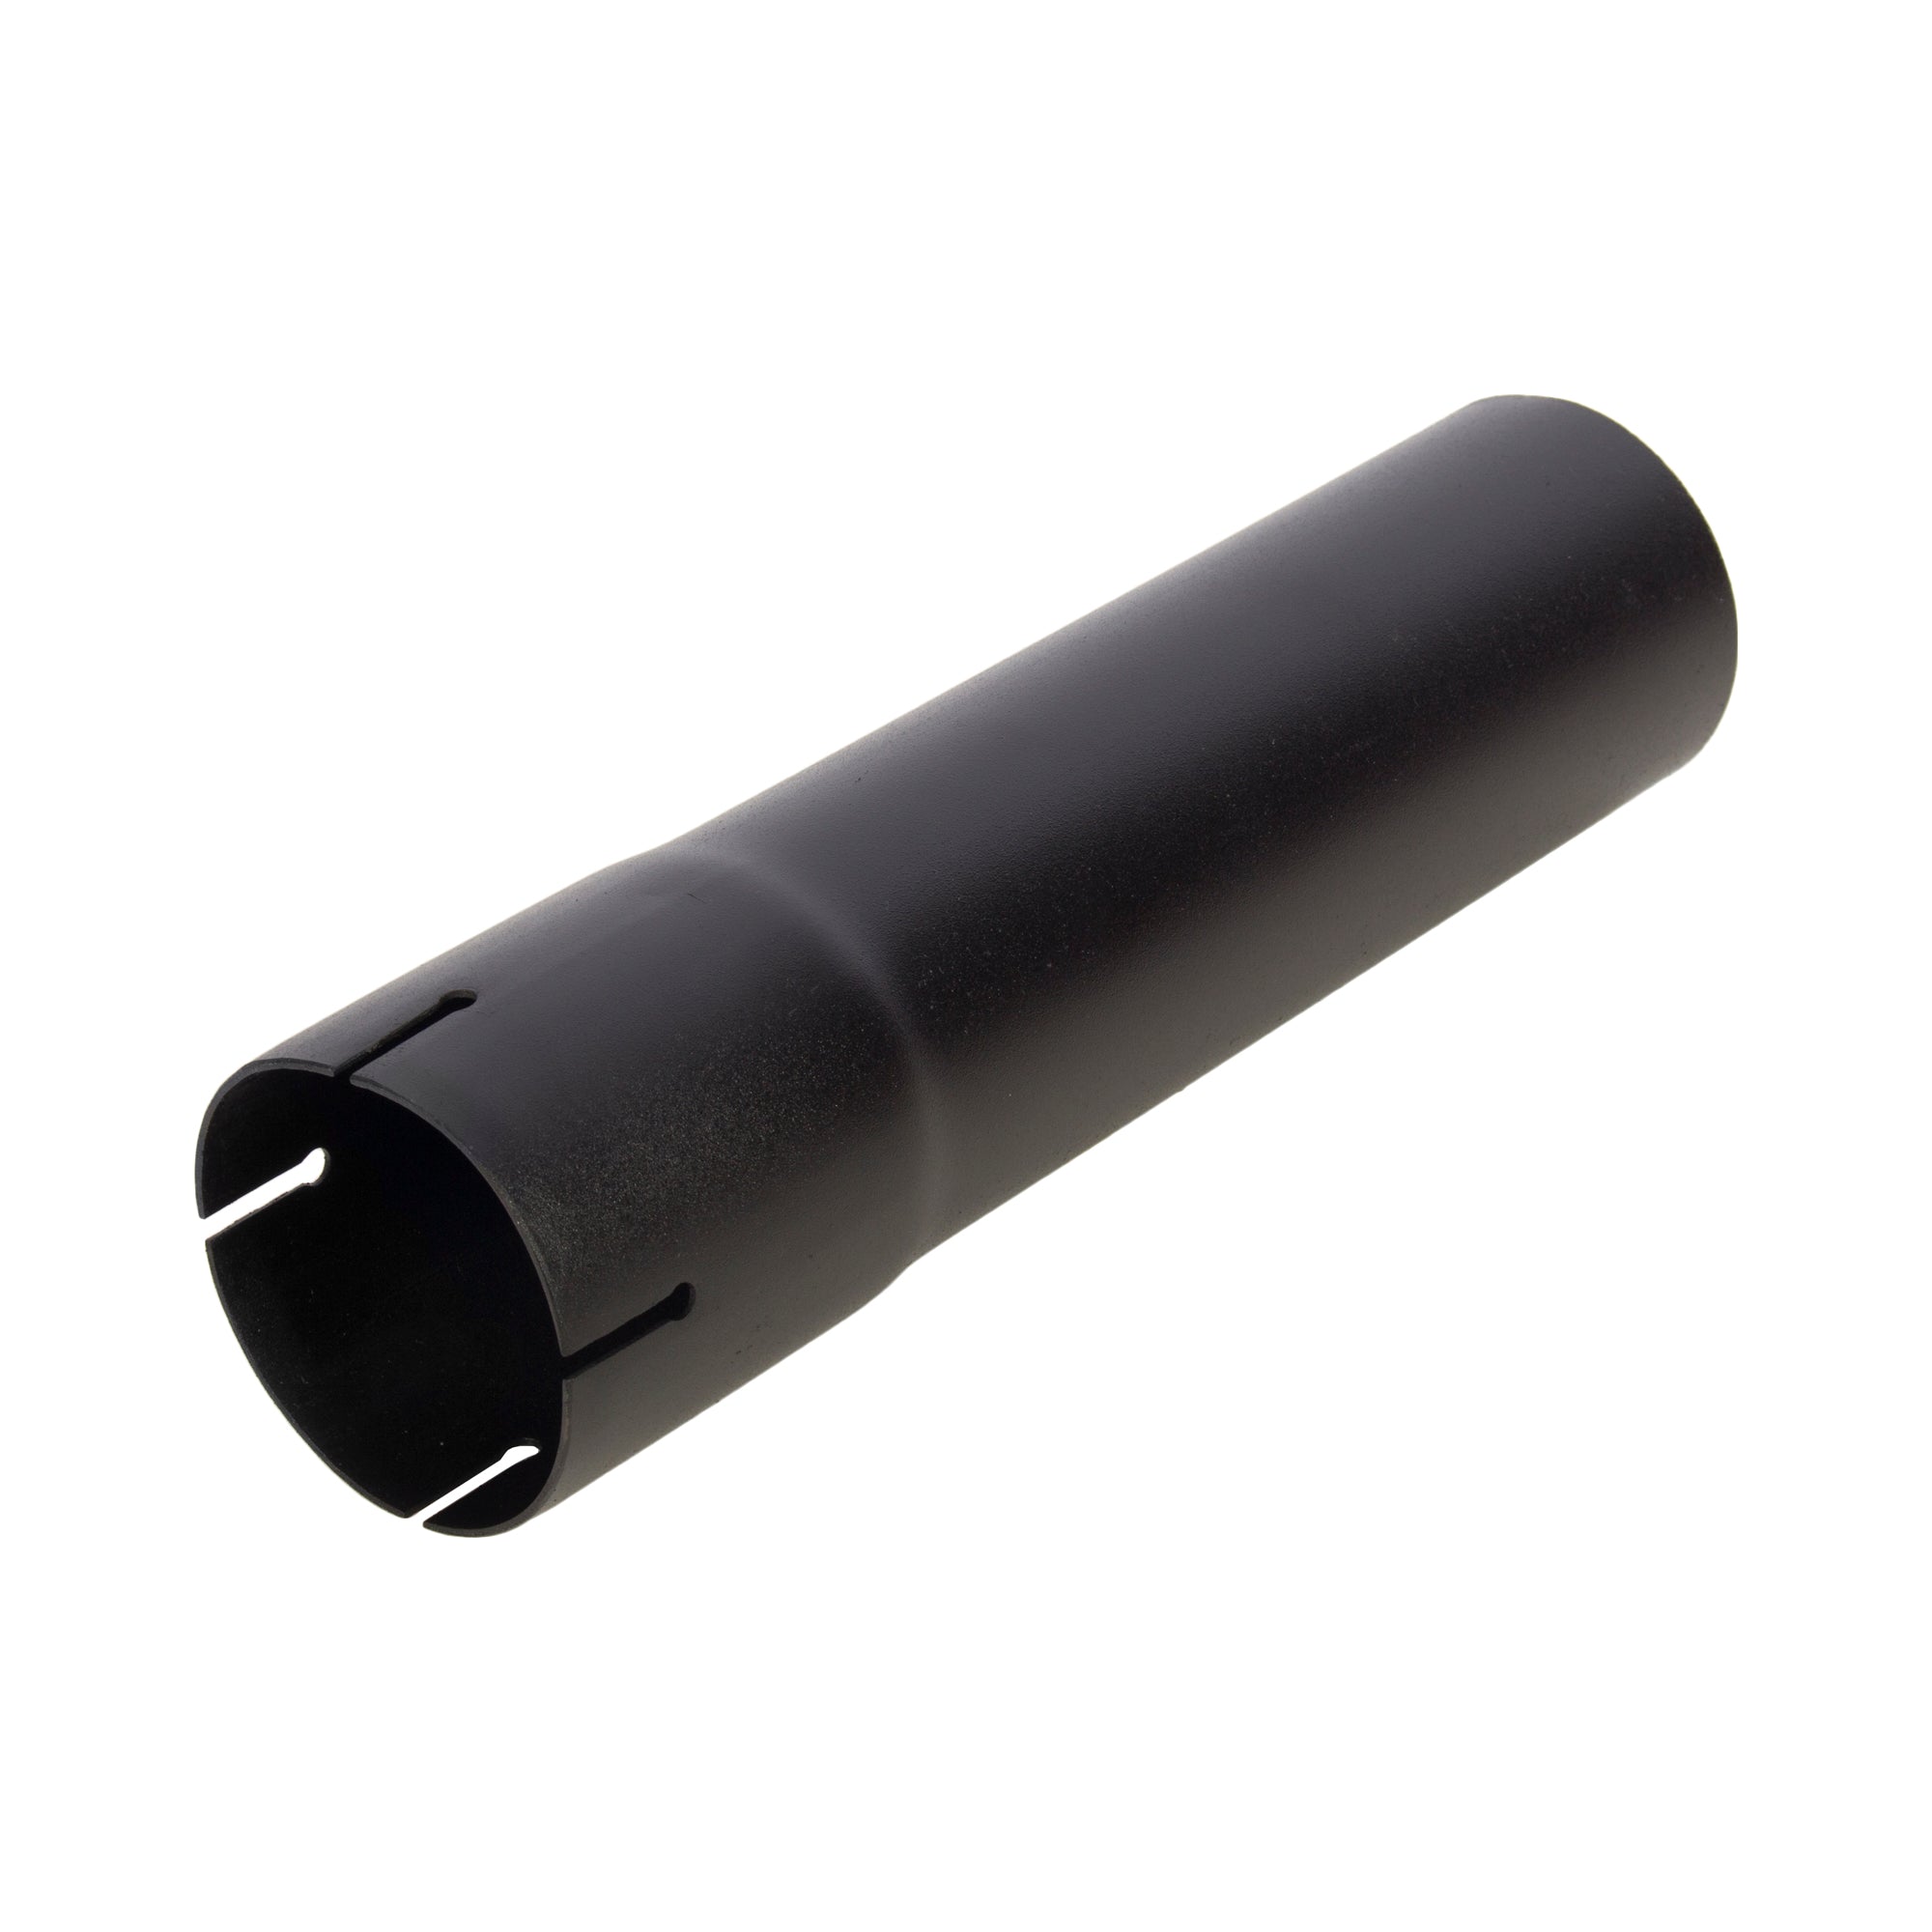 Exhaust Pipe Stack Replacement UNIVERSAL - 3" x 12", Straight Black